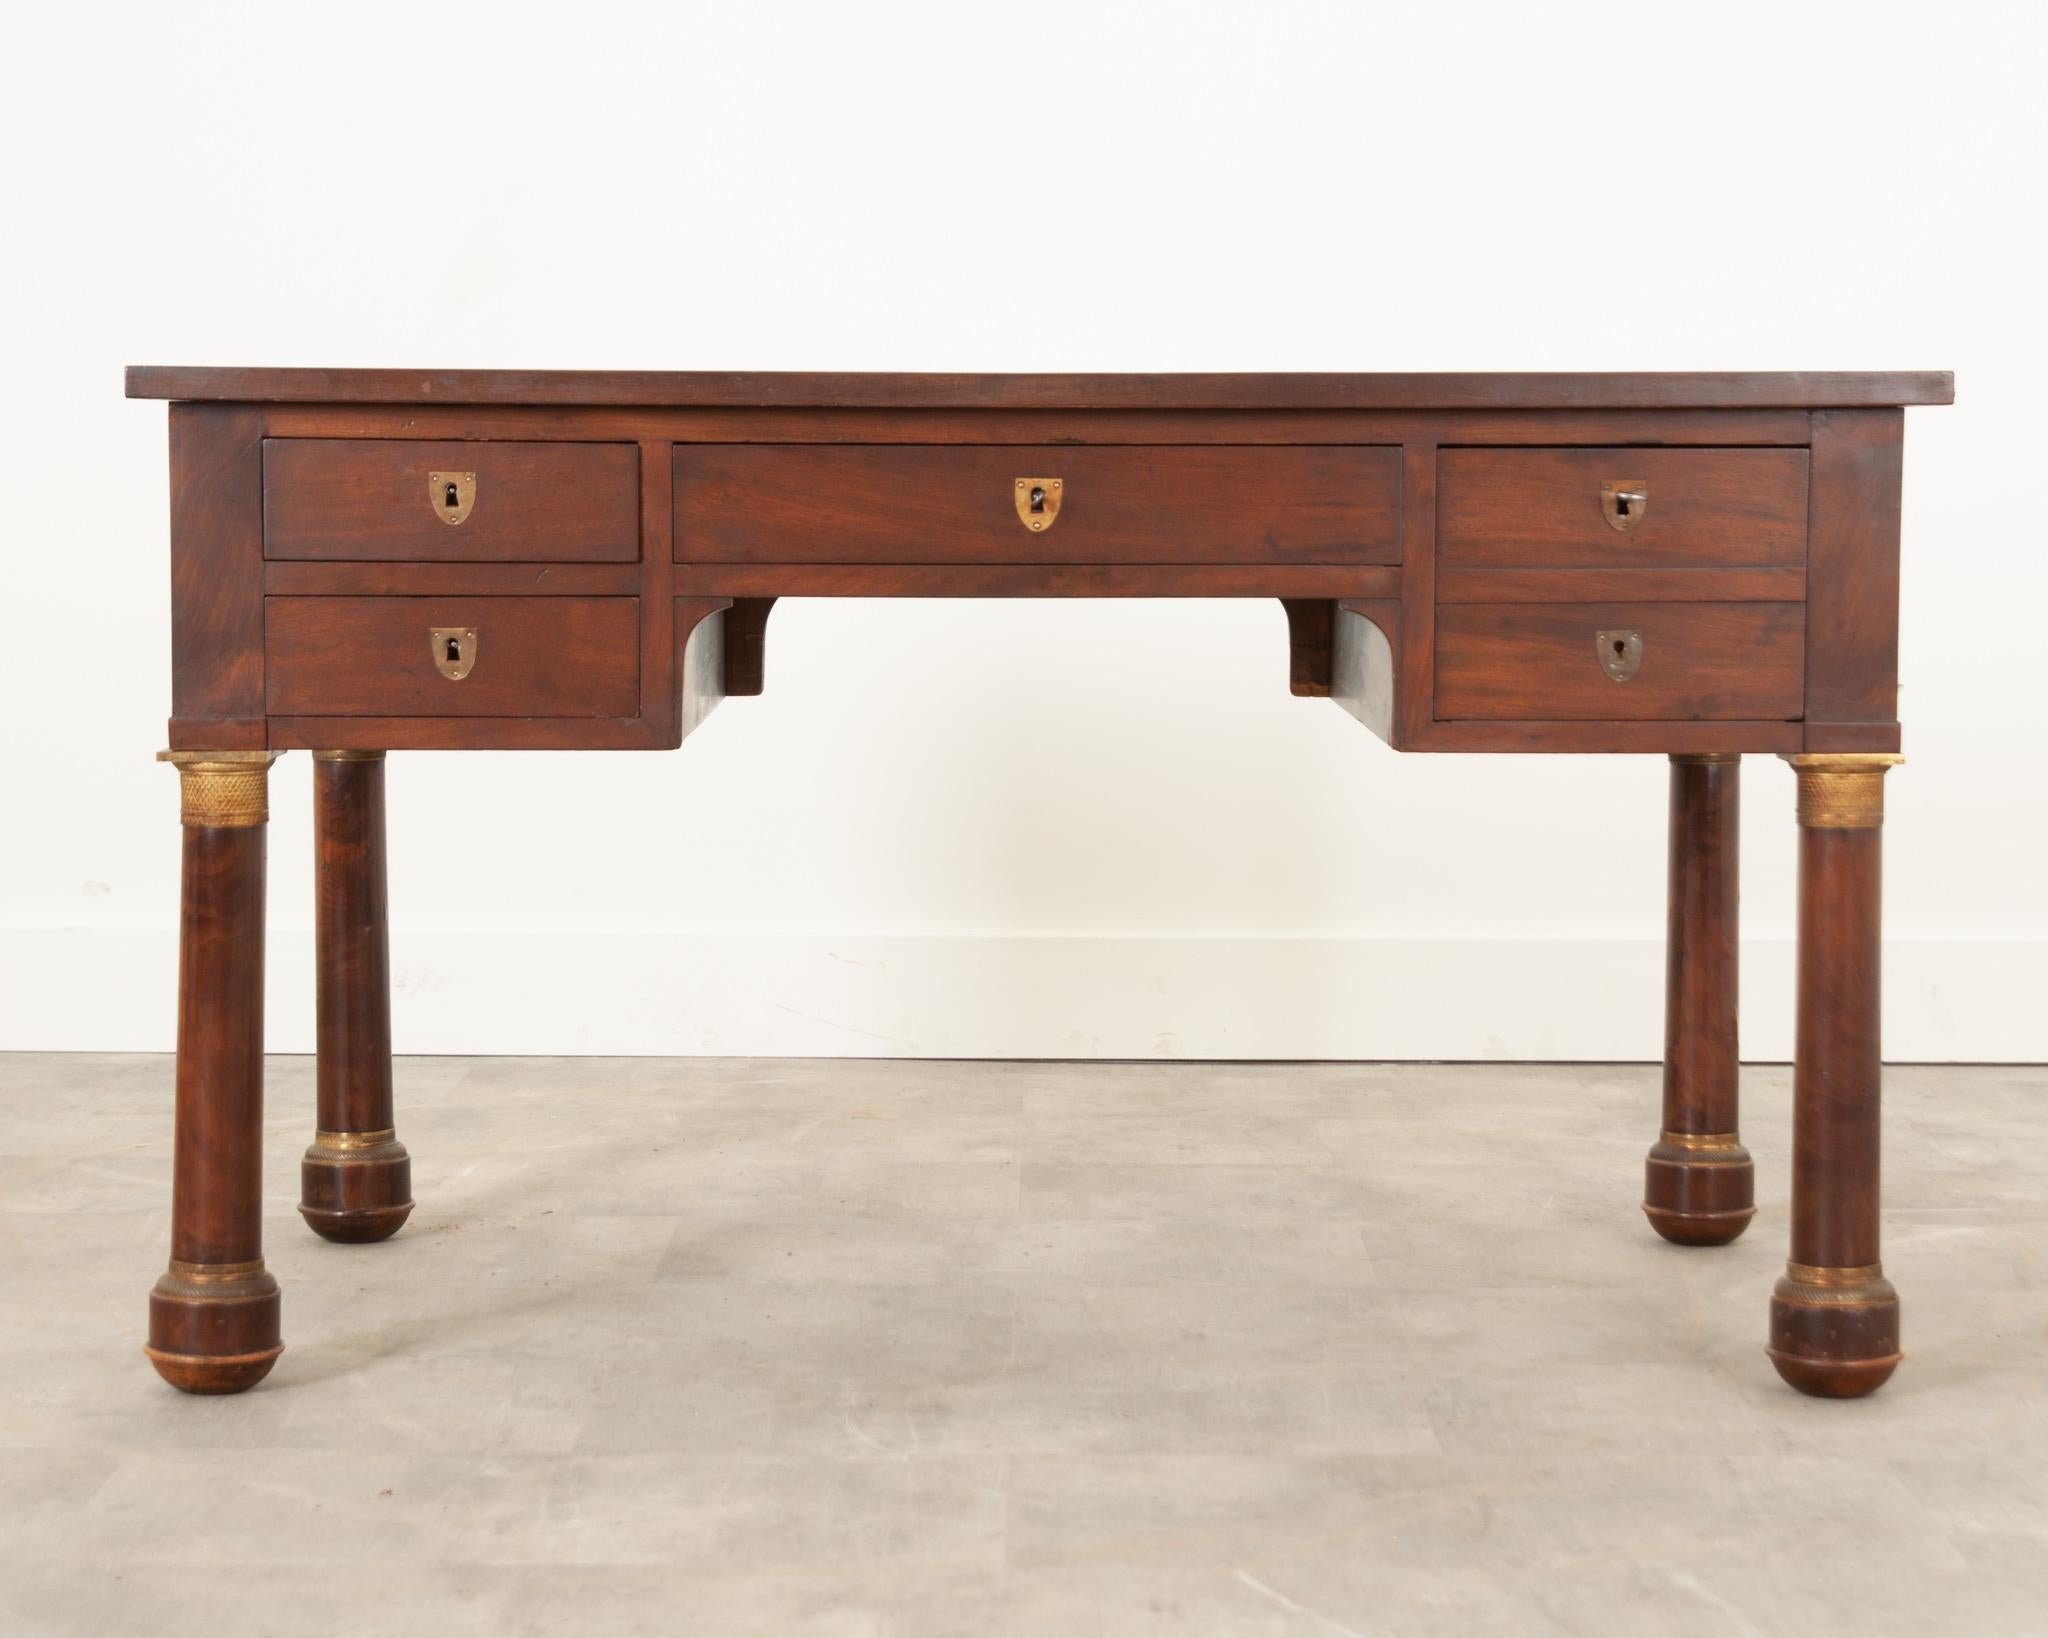 A handsome Empire style desk from 19th century France. Made from a beautiful mahogany that’s been cleaned and polished to reveal a warm patina. The top is inset with the original black leather, detailed with ornate gold tooling around the perimeter.